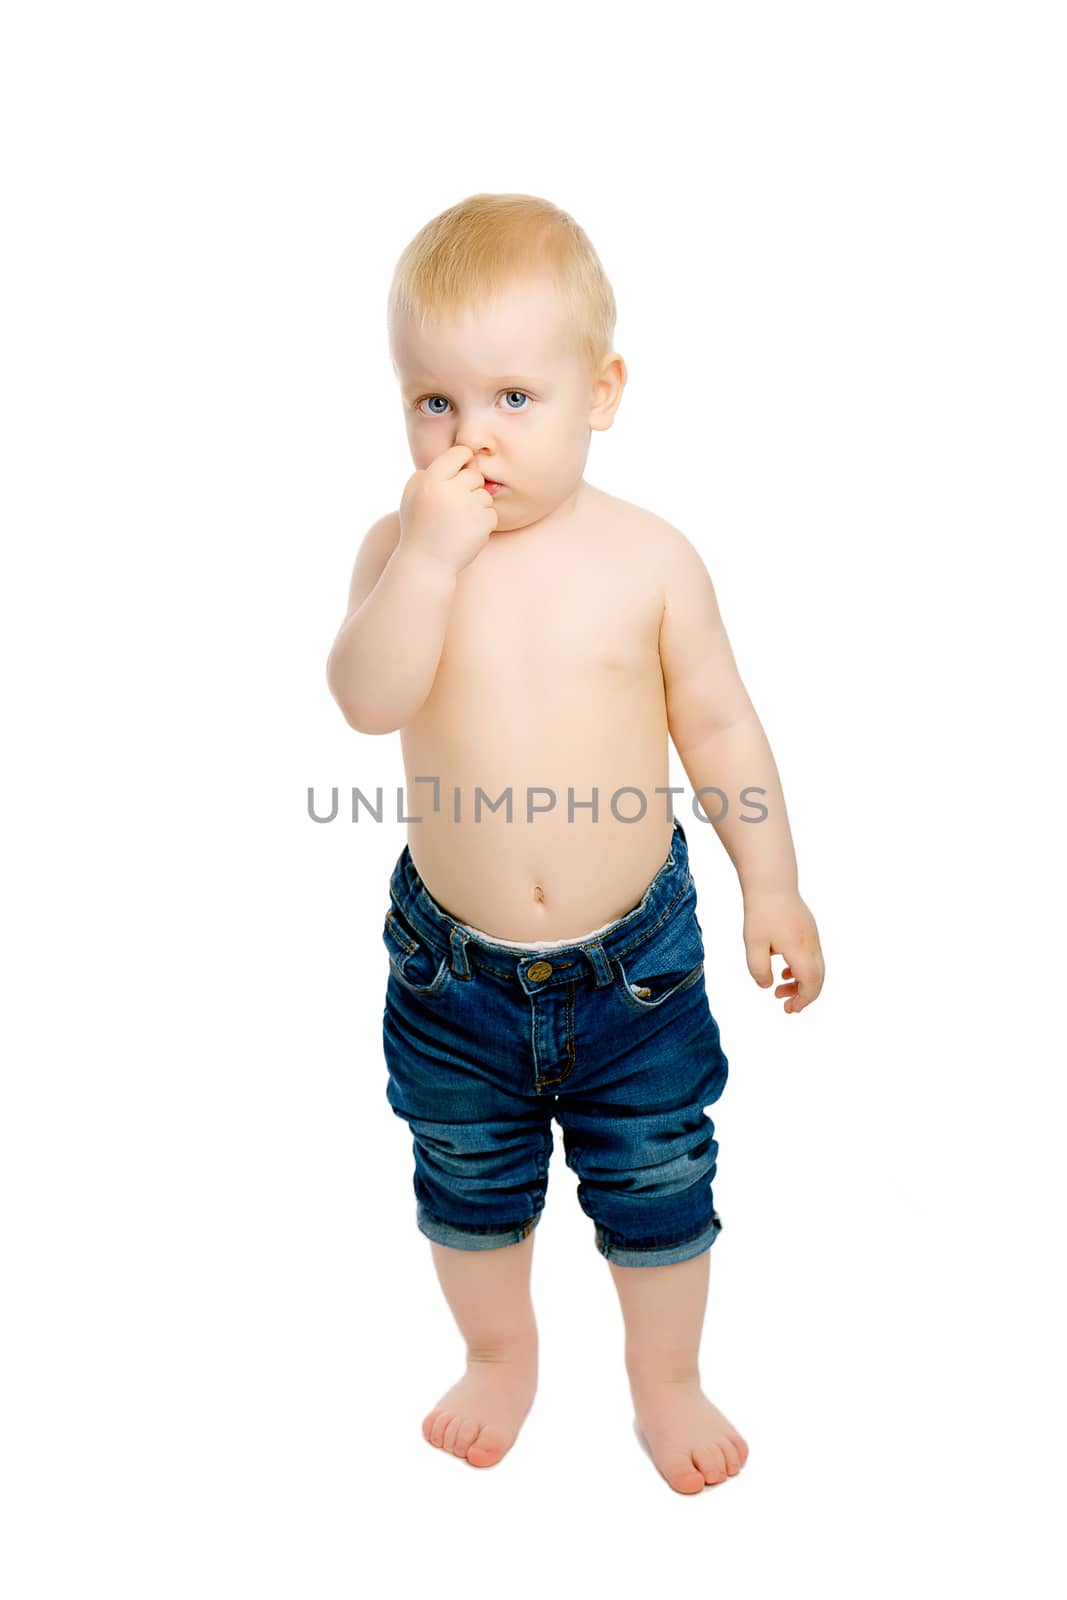 A little boy in a plaid shirt on white background in full length